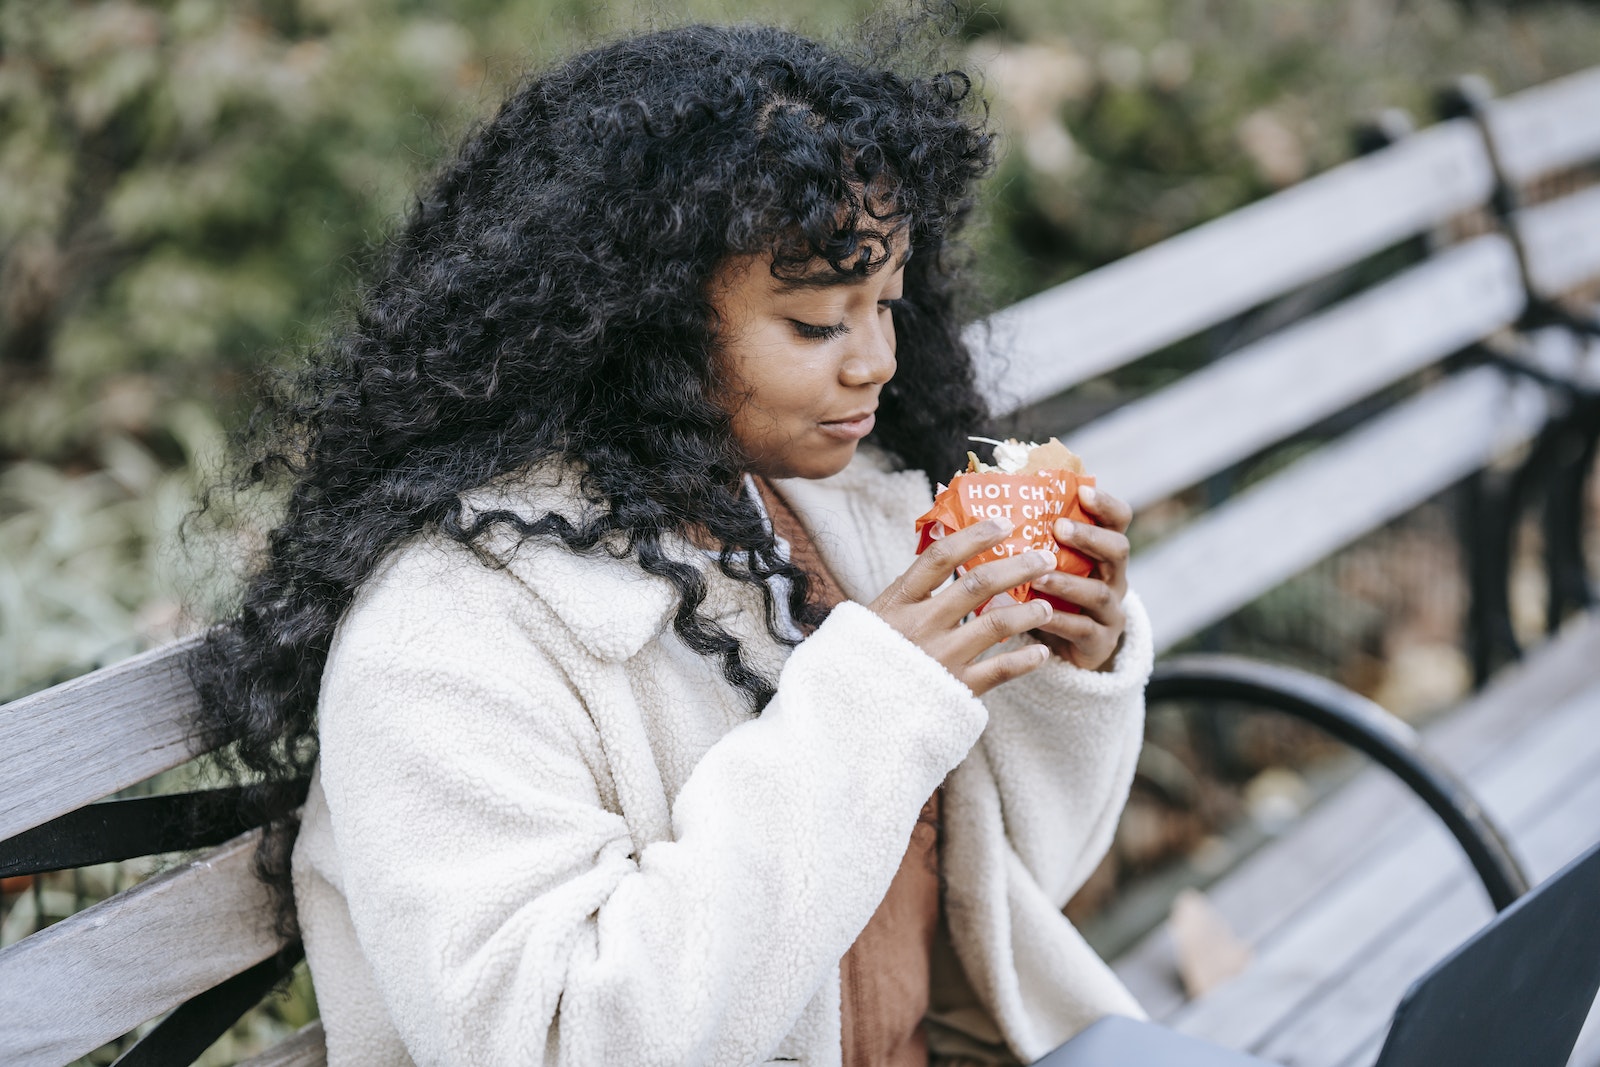 Mindful eating and emotional hunger long-term